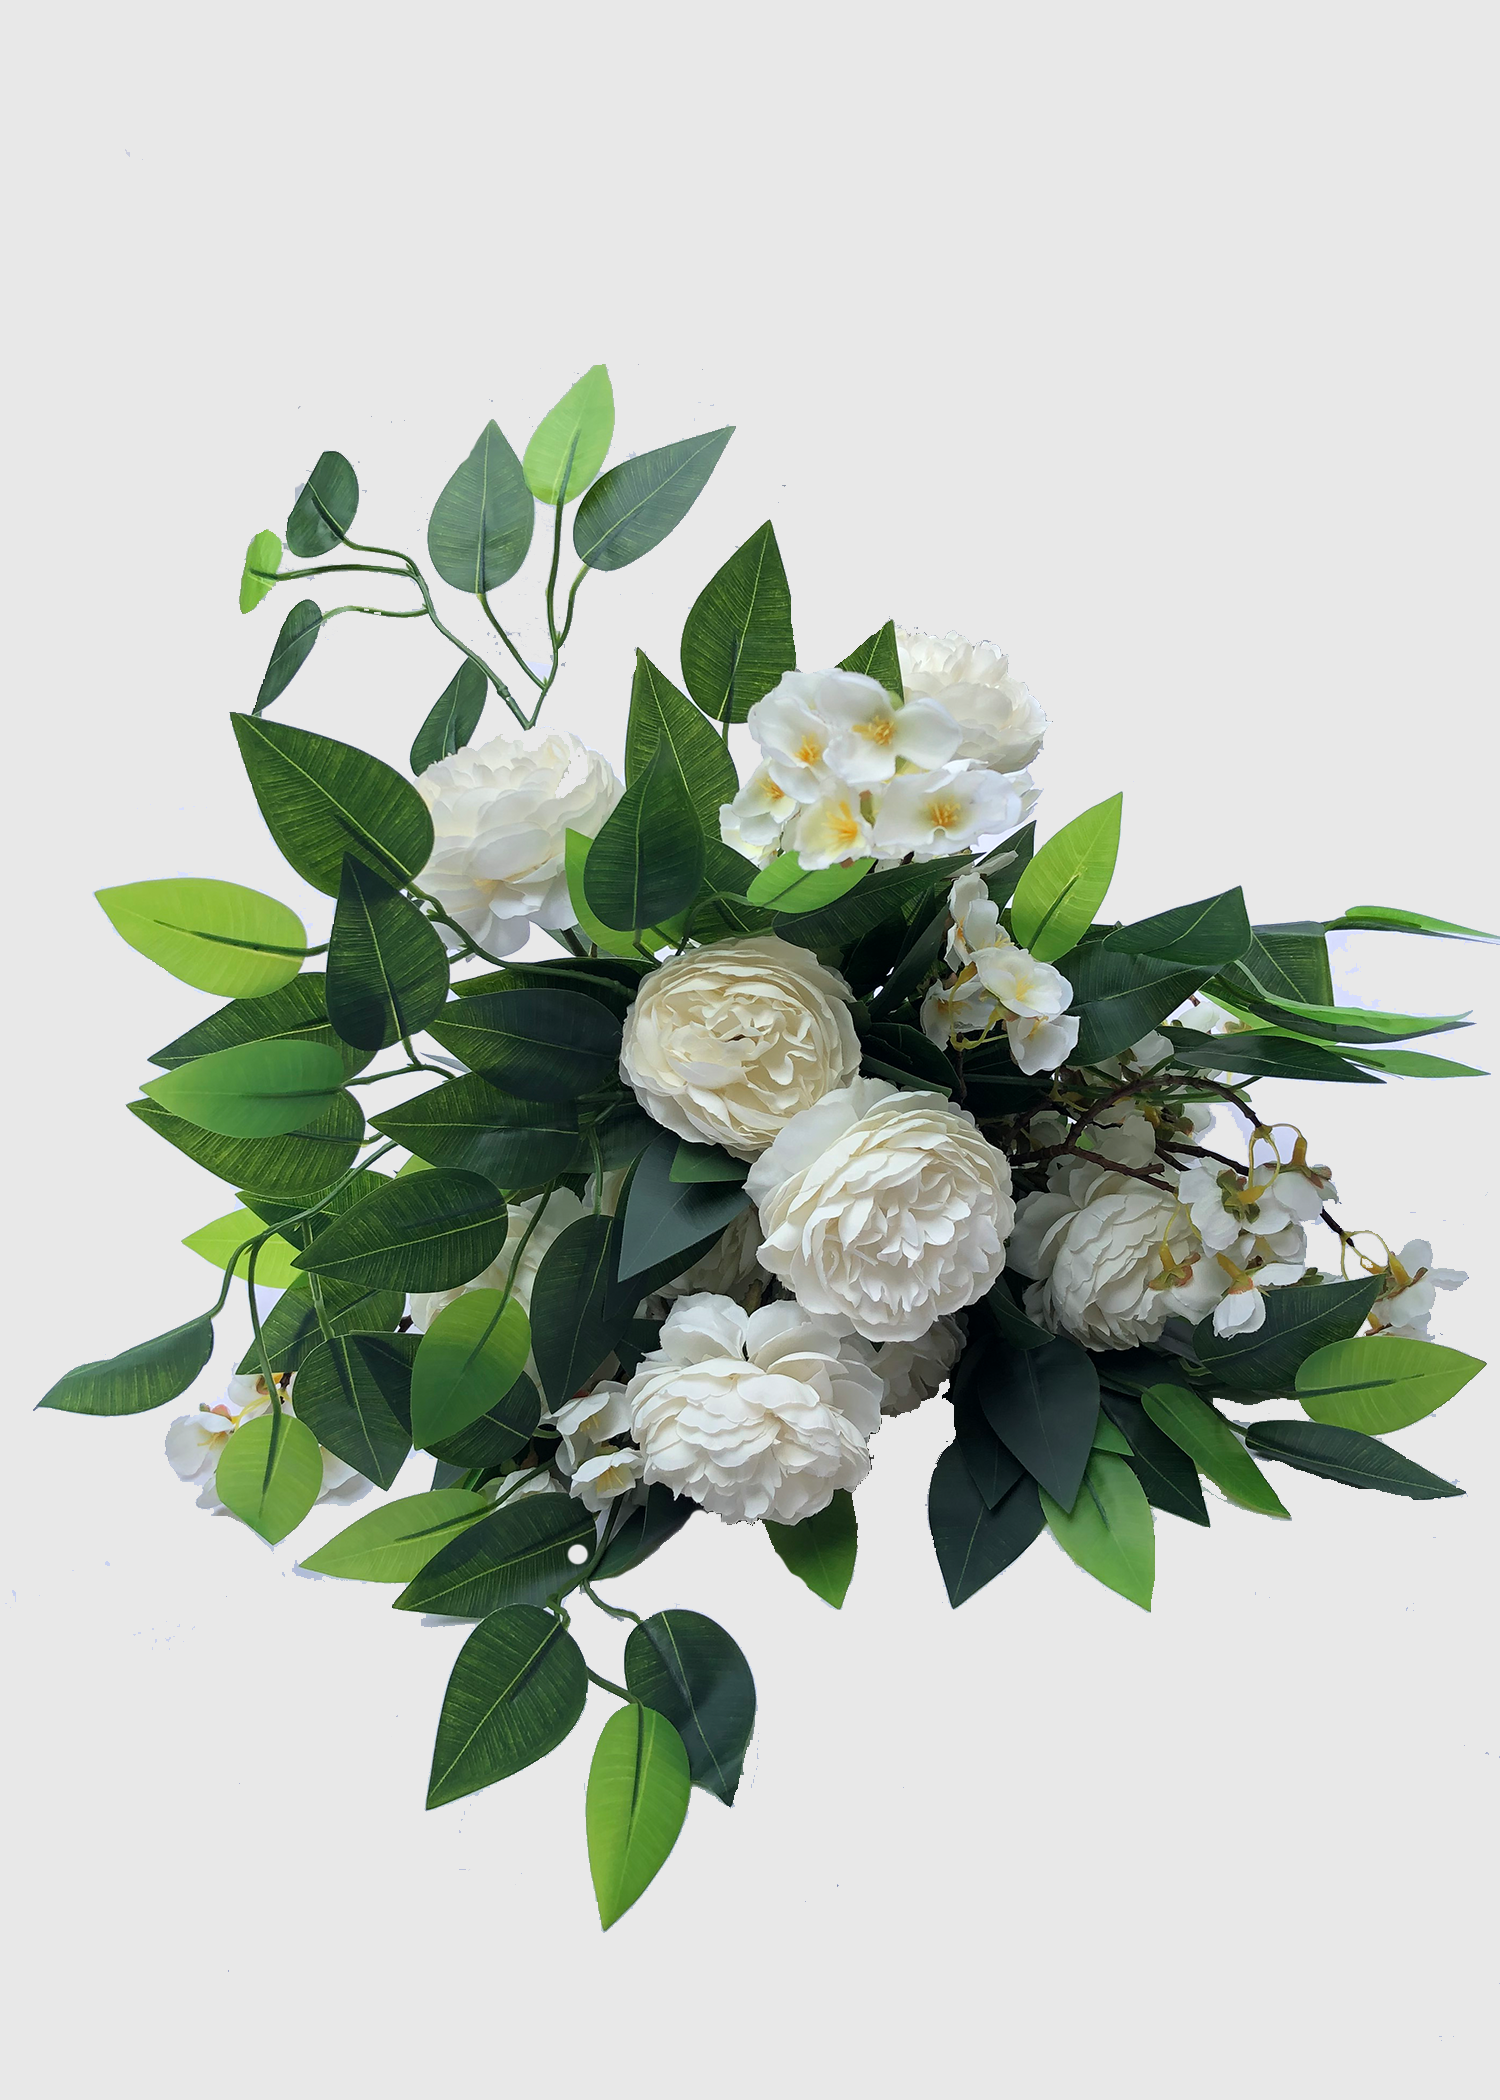 Bouquet of Flowers - Tropical plants and white peonies